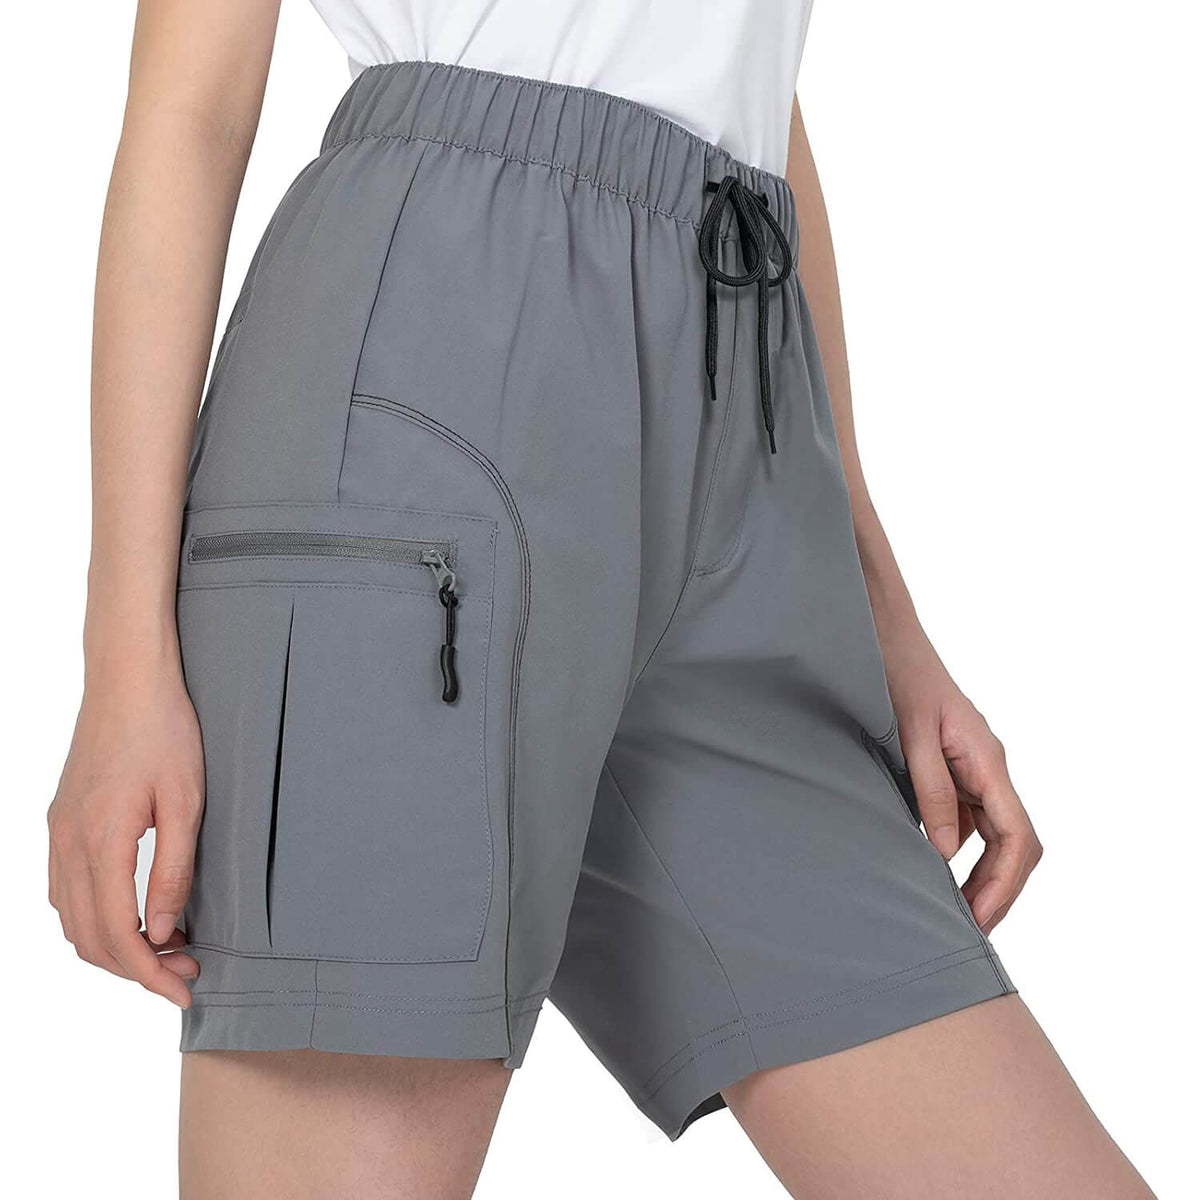 Women Quick Dry Hiking Camping Shorts 08A.